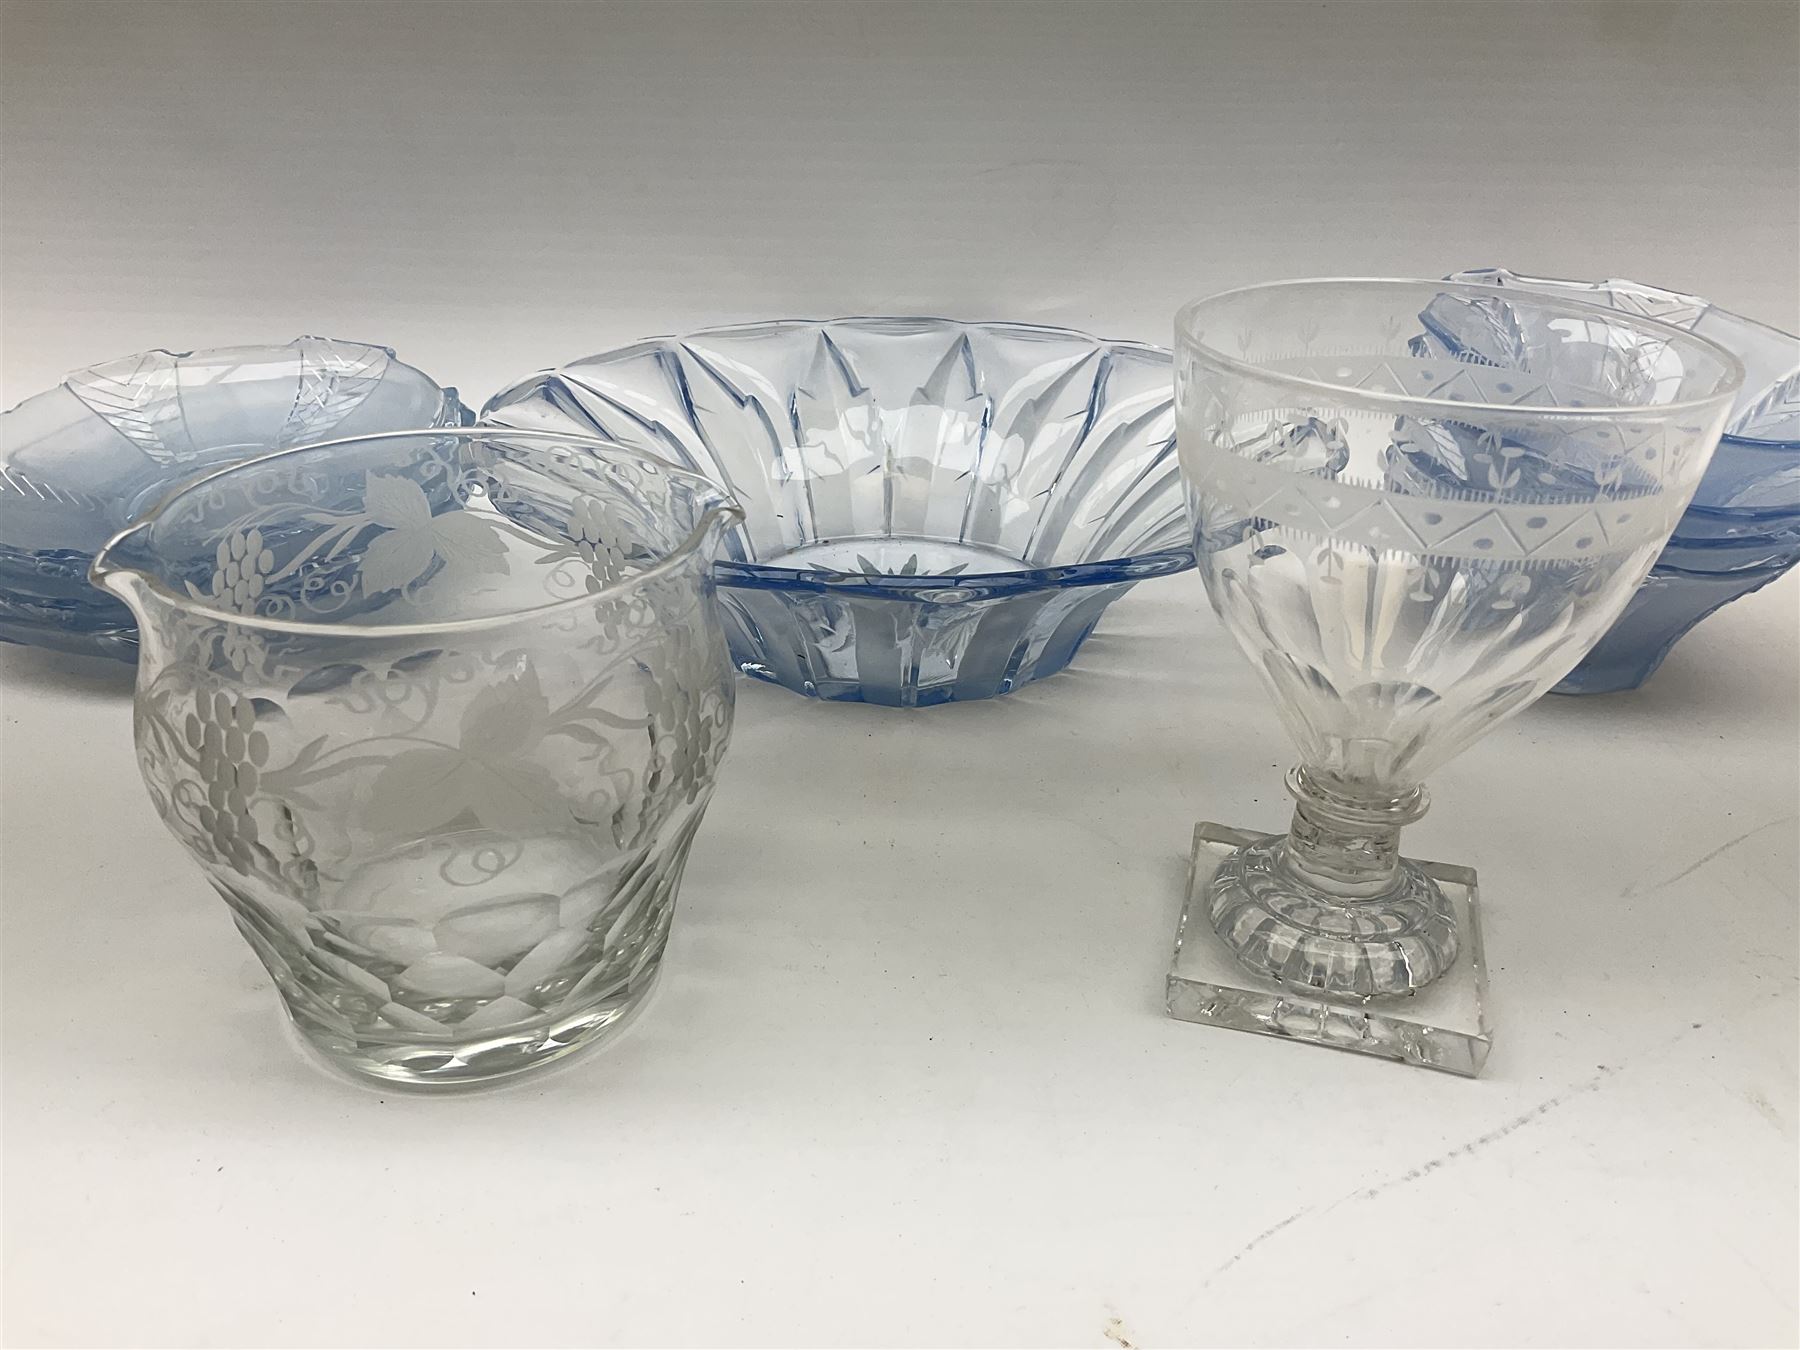 19th century glass rummer - Image 2 of 2